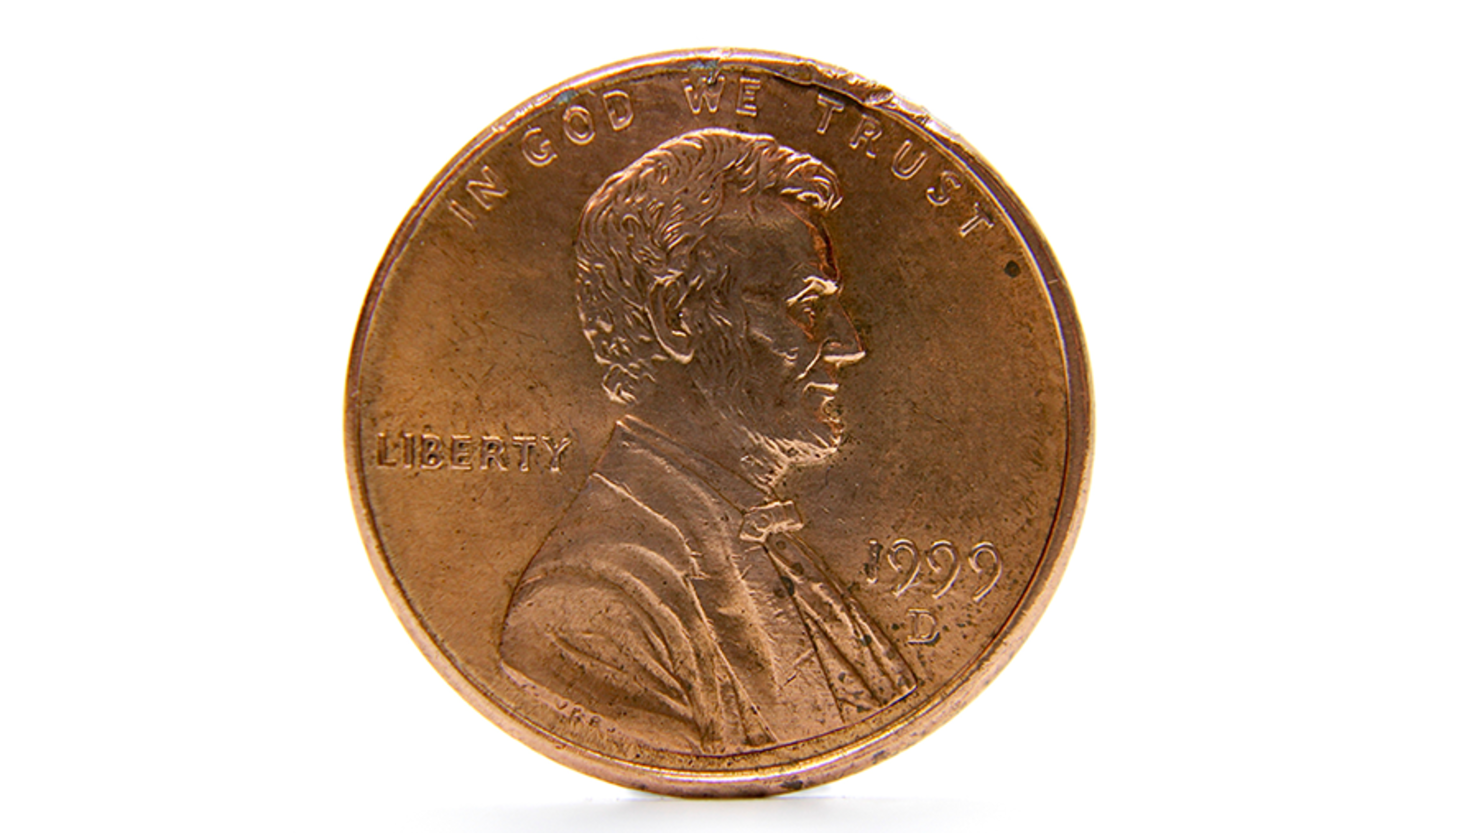 Common 1999 Pennies Are Worth Up To $4,500 | iHeart